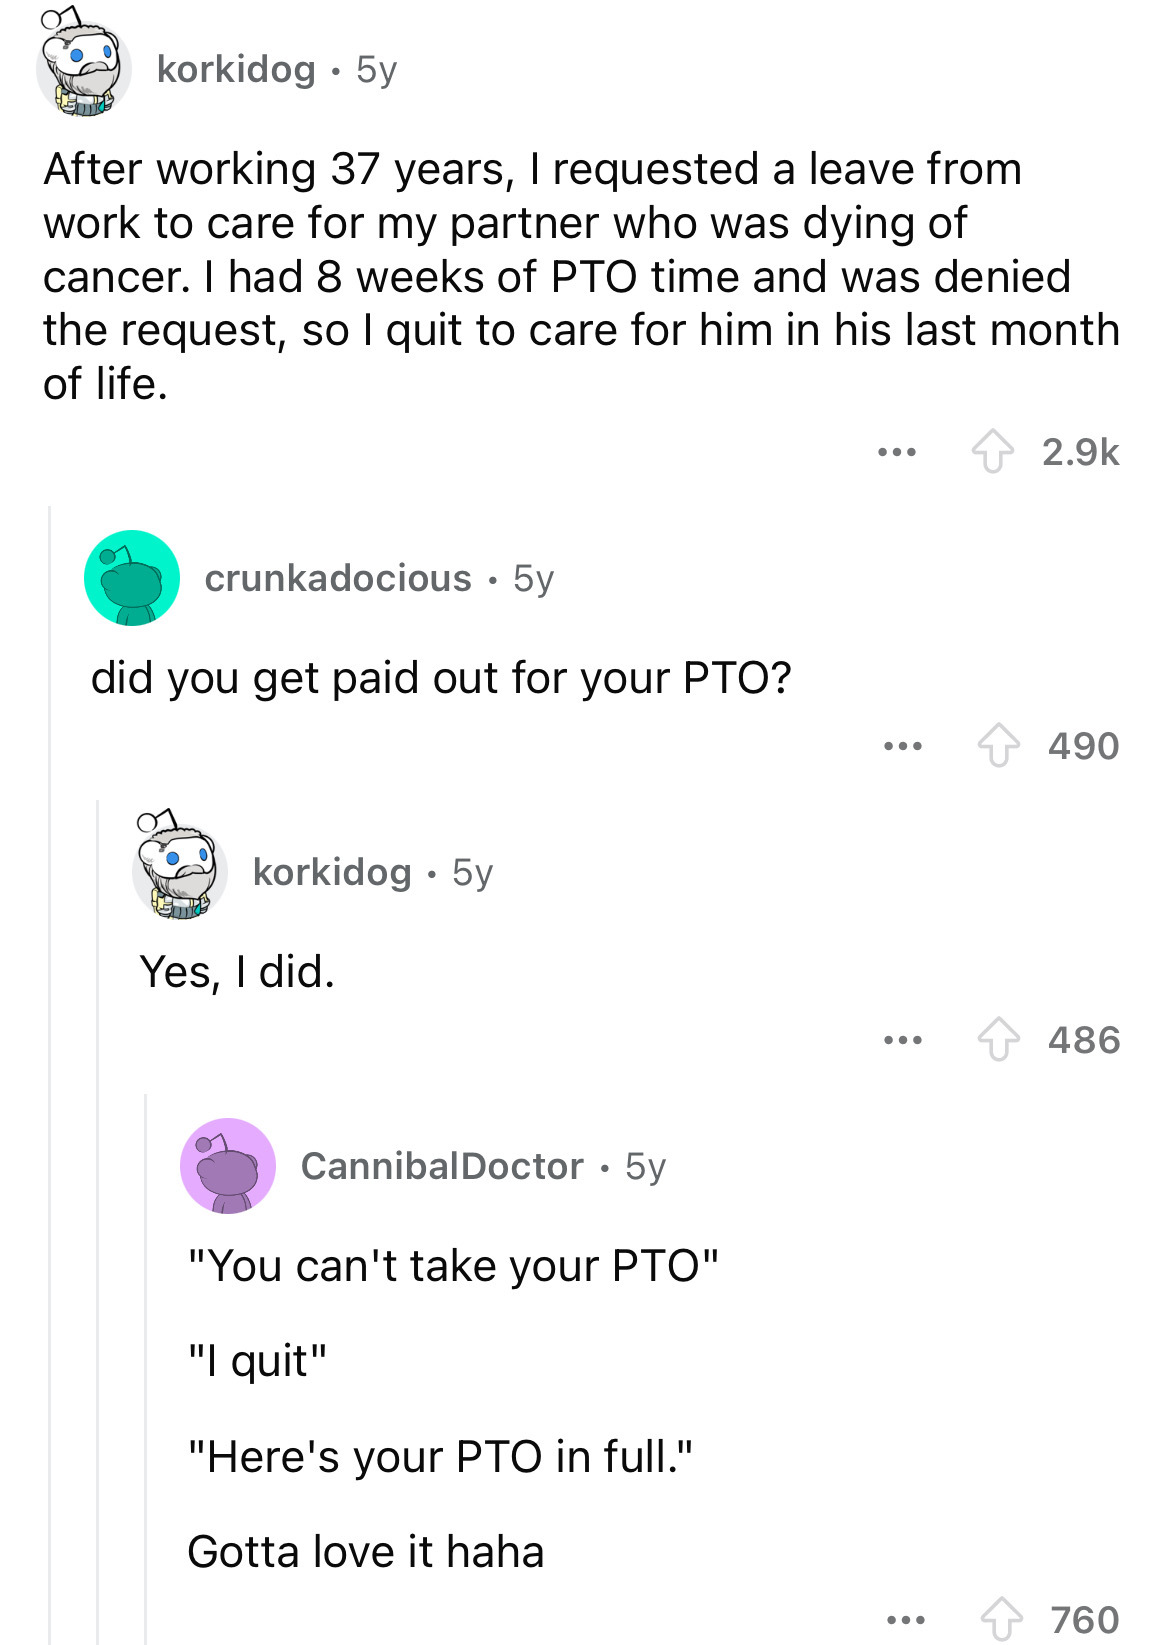 screenshot - korkidog 5y After working 37 years, I requested a leave from work to care for my partner who was dying of cancer. I had 8 weeks of Pto time and was denied the request, so I quit to care for him in his last month. of life. crunkadocious 5y did